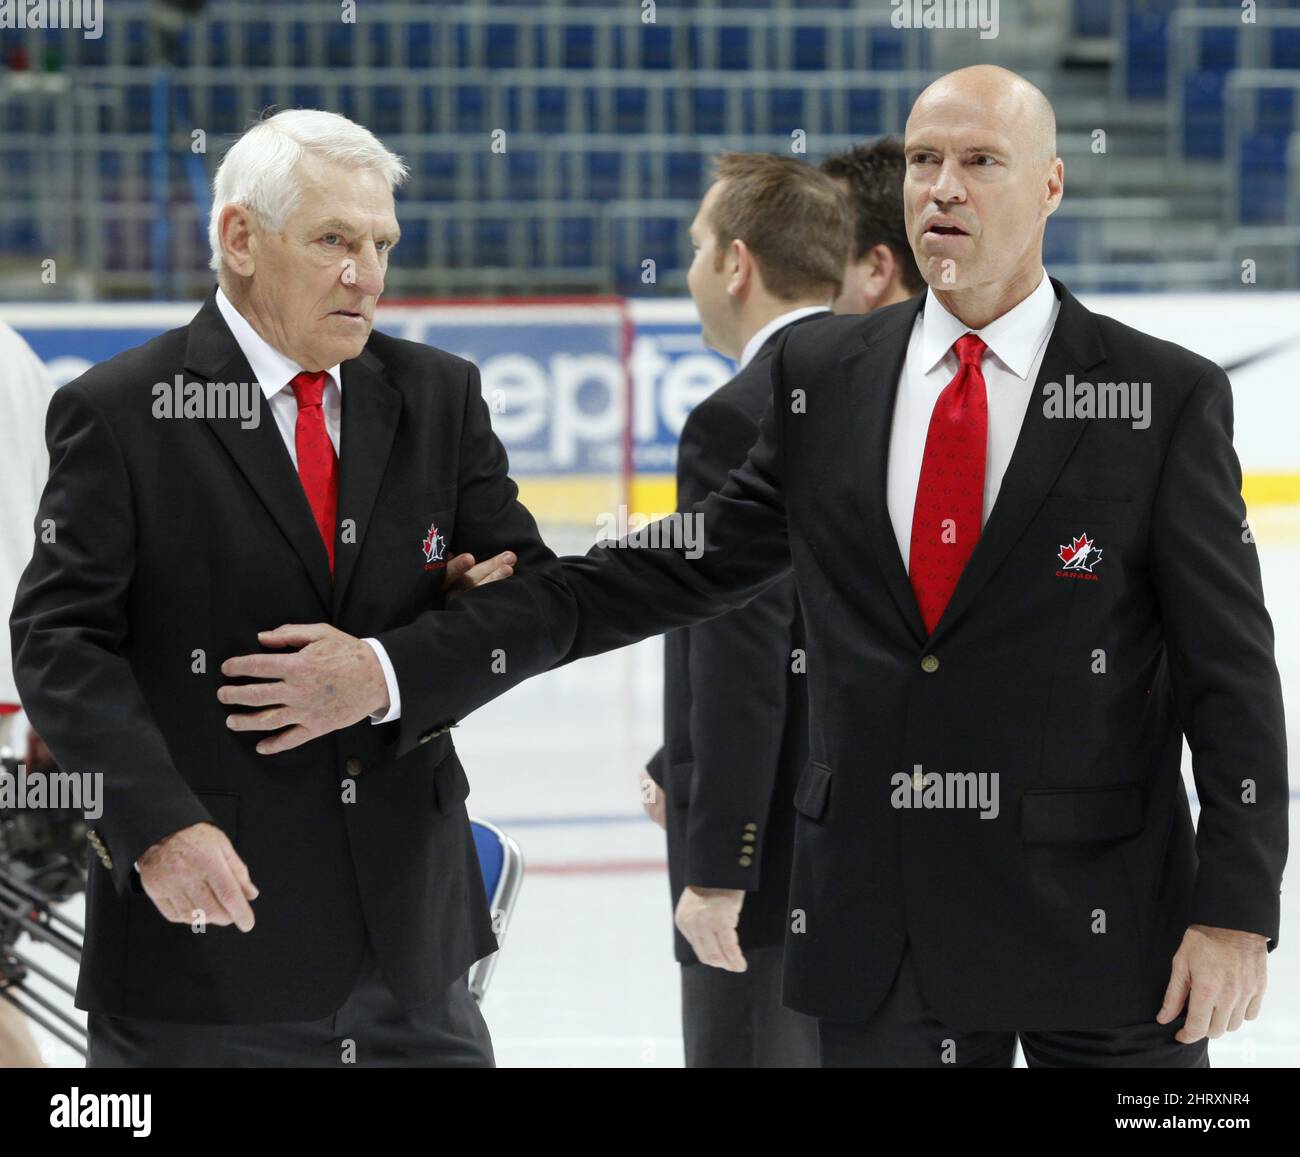 Team Canada general manager Mark Messier helps his father, Doug, manager of the team, onto the ice as they prepare for the team photo, Monday May 17, 2010, at the IIHF world hockey championship in Mannheim, Germany. (AP Photo/The Canadian Press, Jacques Boissinot) Stock Photo